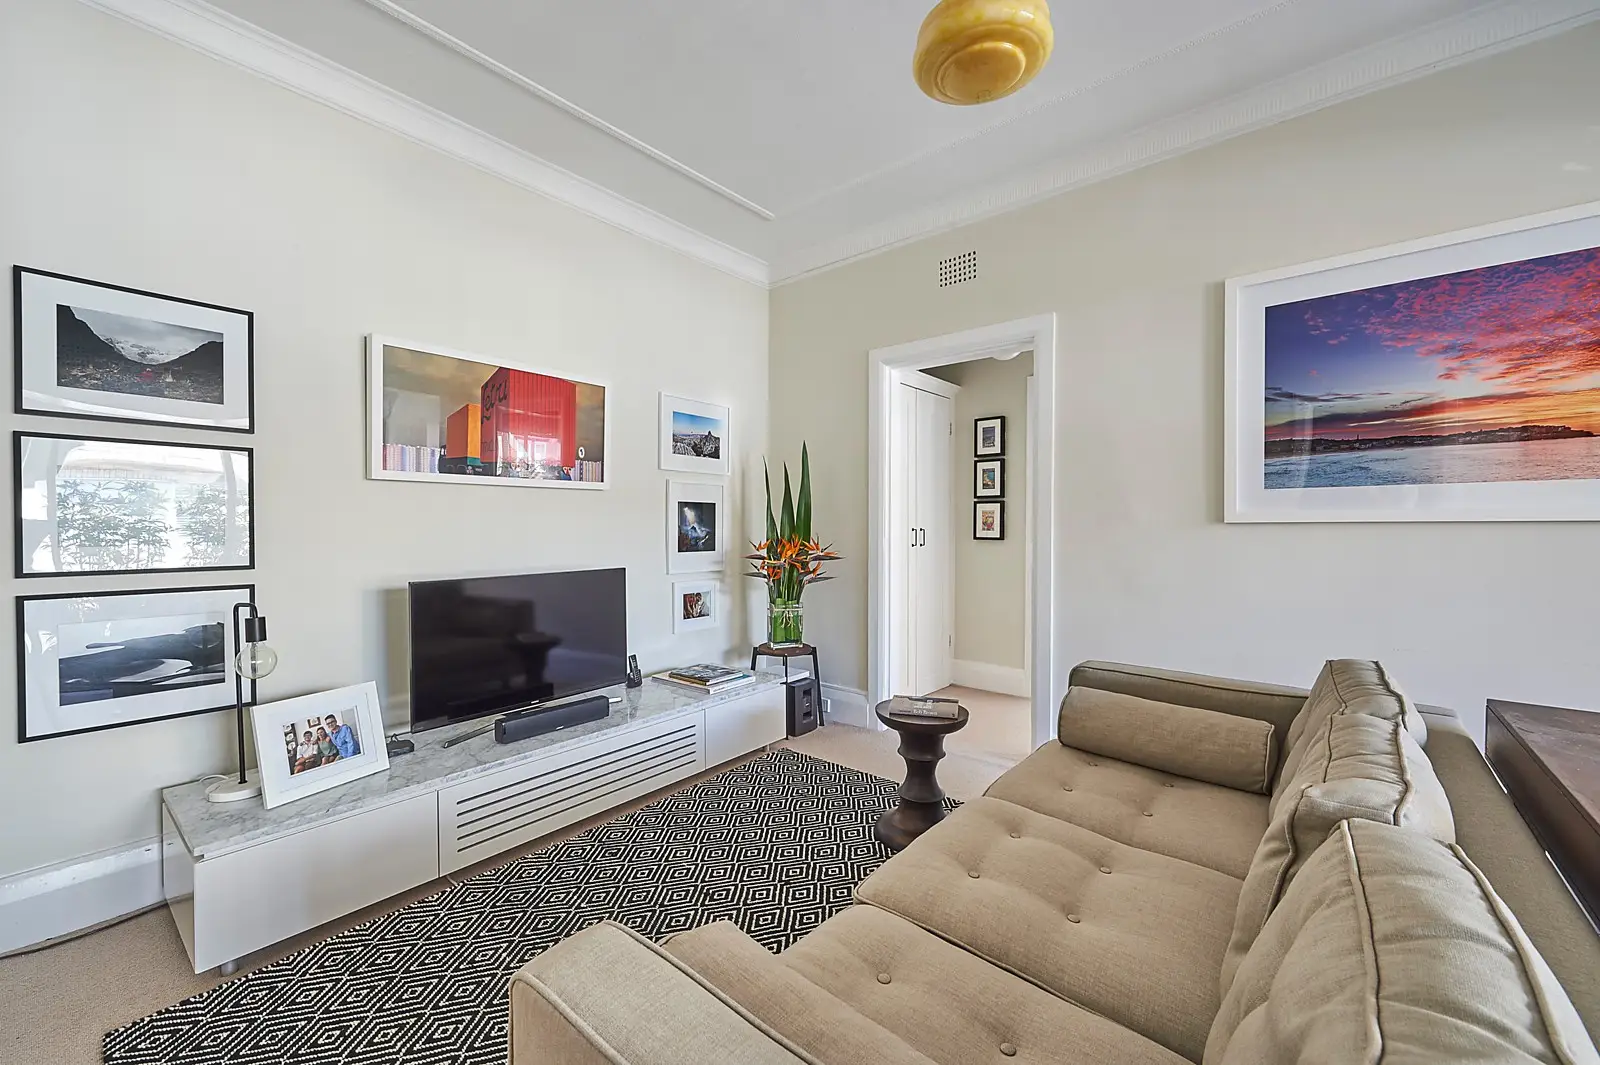 Photo #2: 8/172 New South Head Road, Edgecliff - Sold by Sydney Sotheby's International Realty